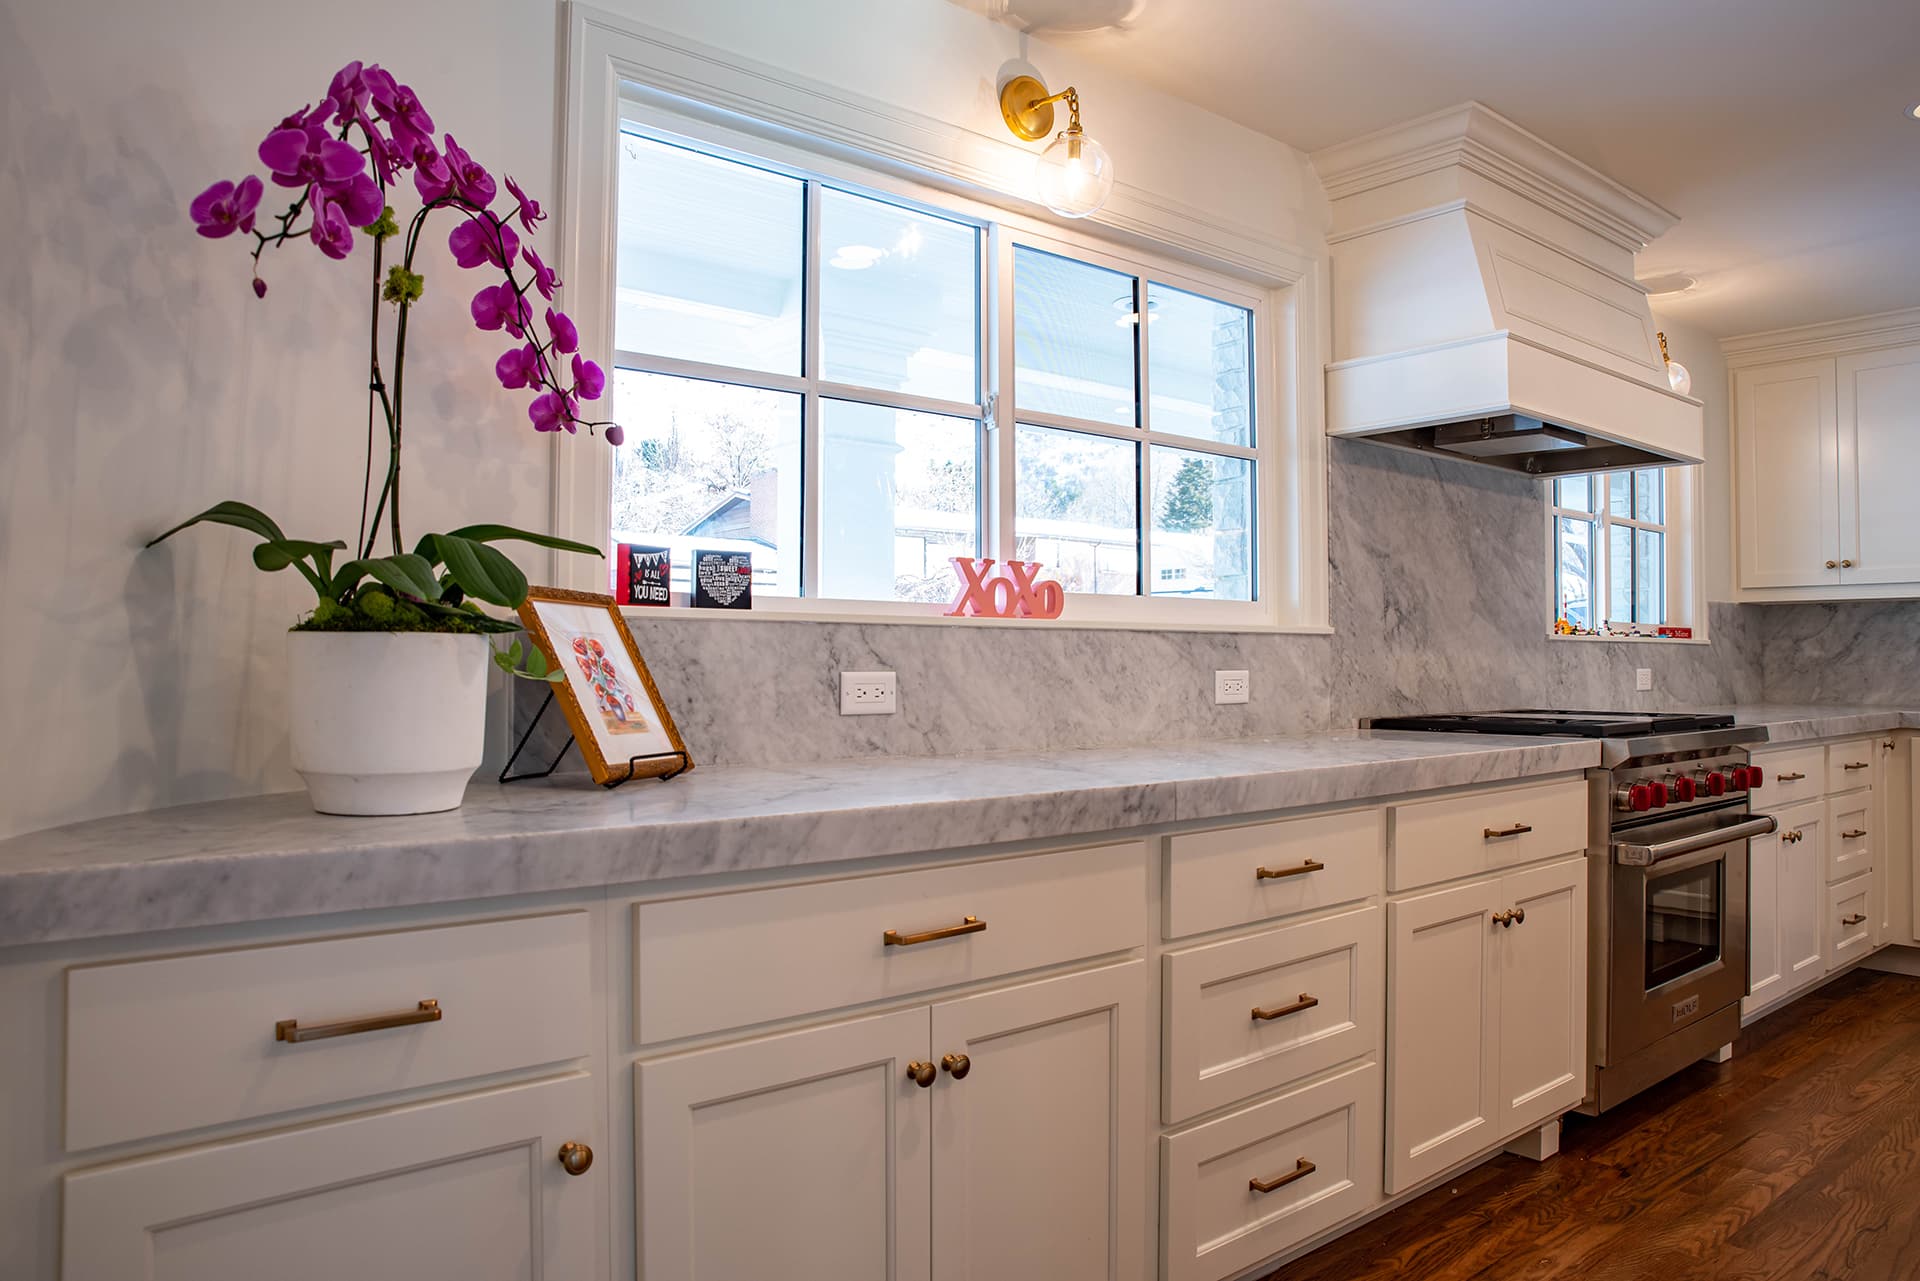 Kitchen Cabinets and Countertops – Salt Lake City, UT %% | Out Of The